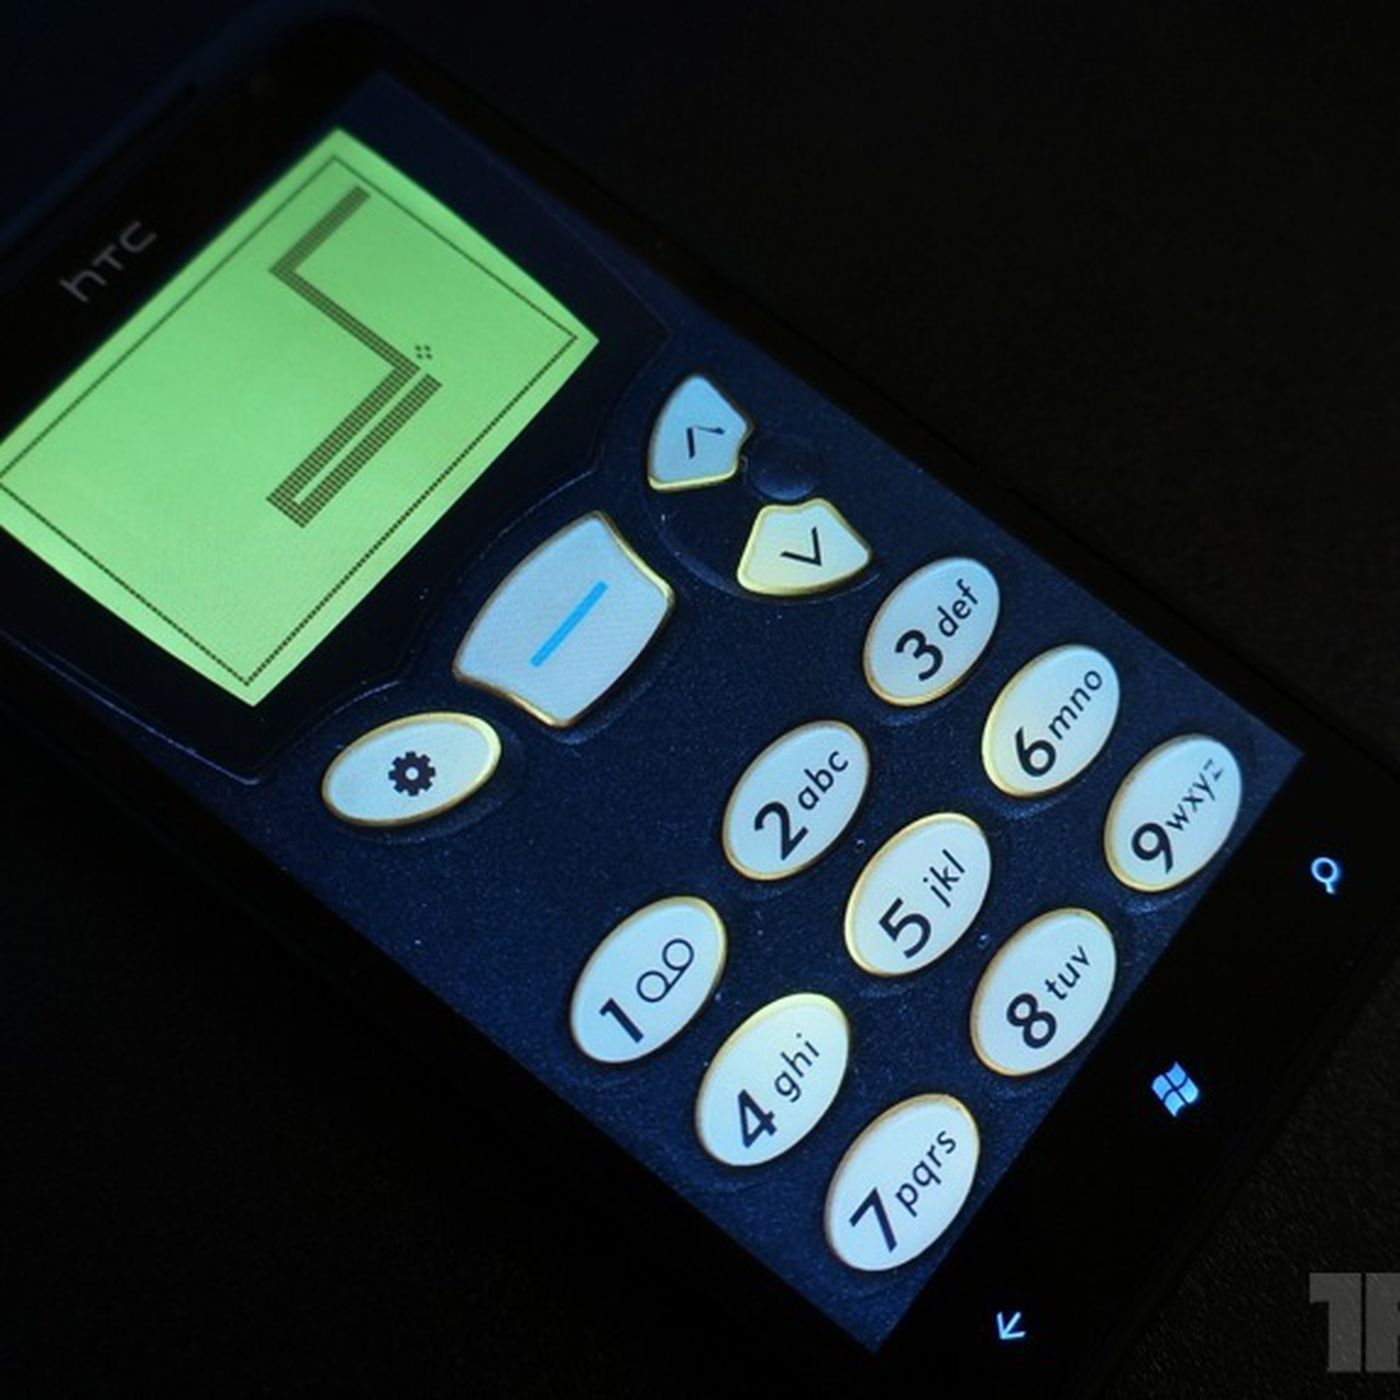 Snake 97 For Windows Phone 7 5 Brings Classic Nokia Gaming To